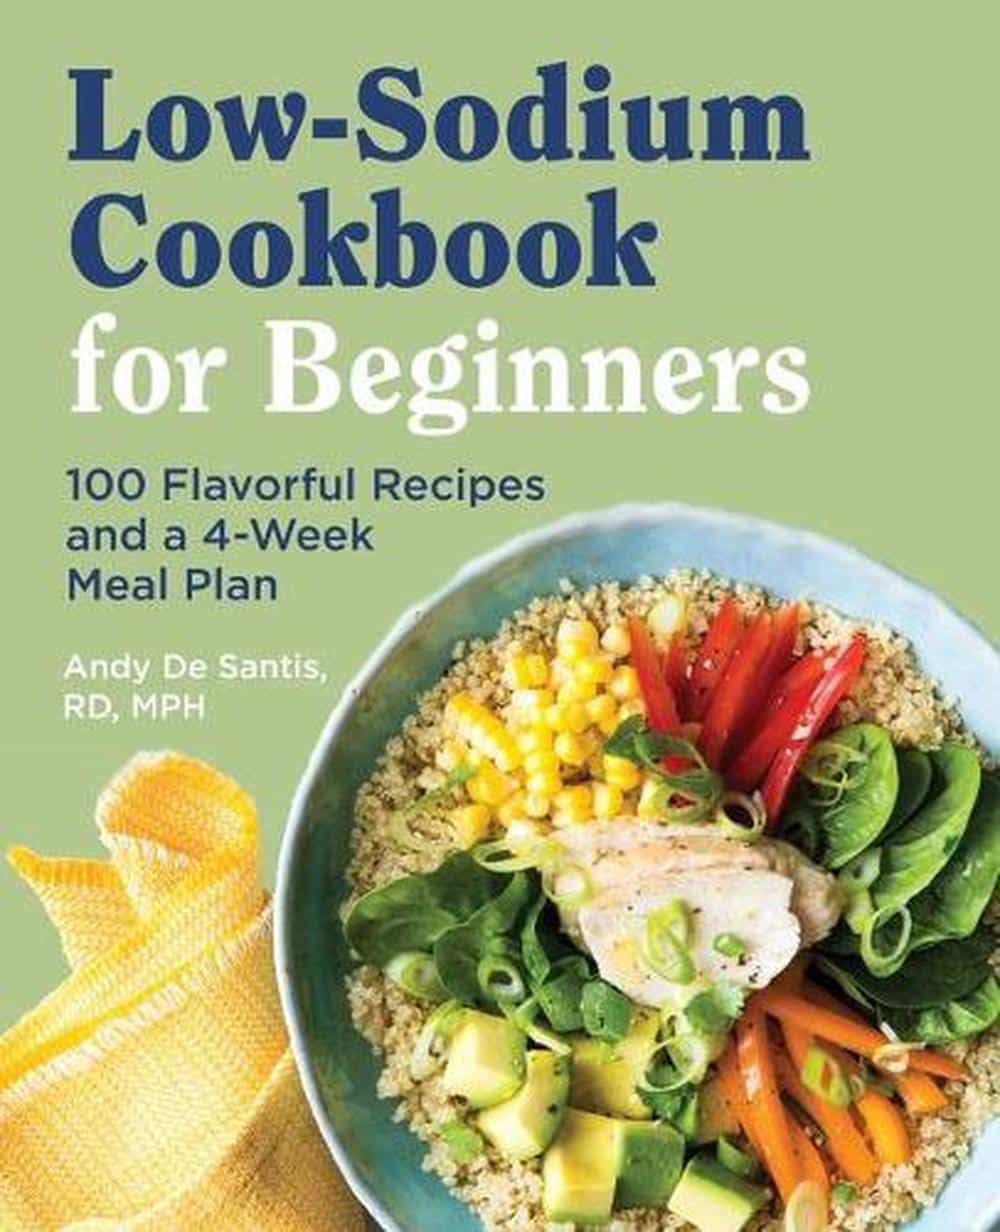 Low Sodium Cookbook for Beginners: 100 Flavorful Recipes and a 4